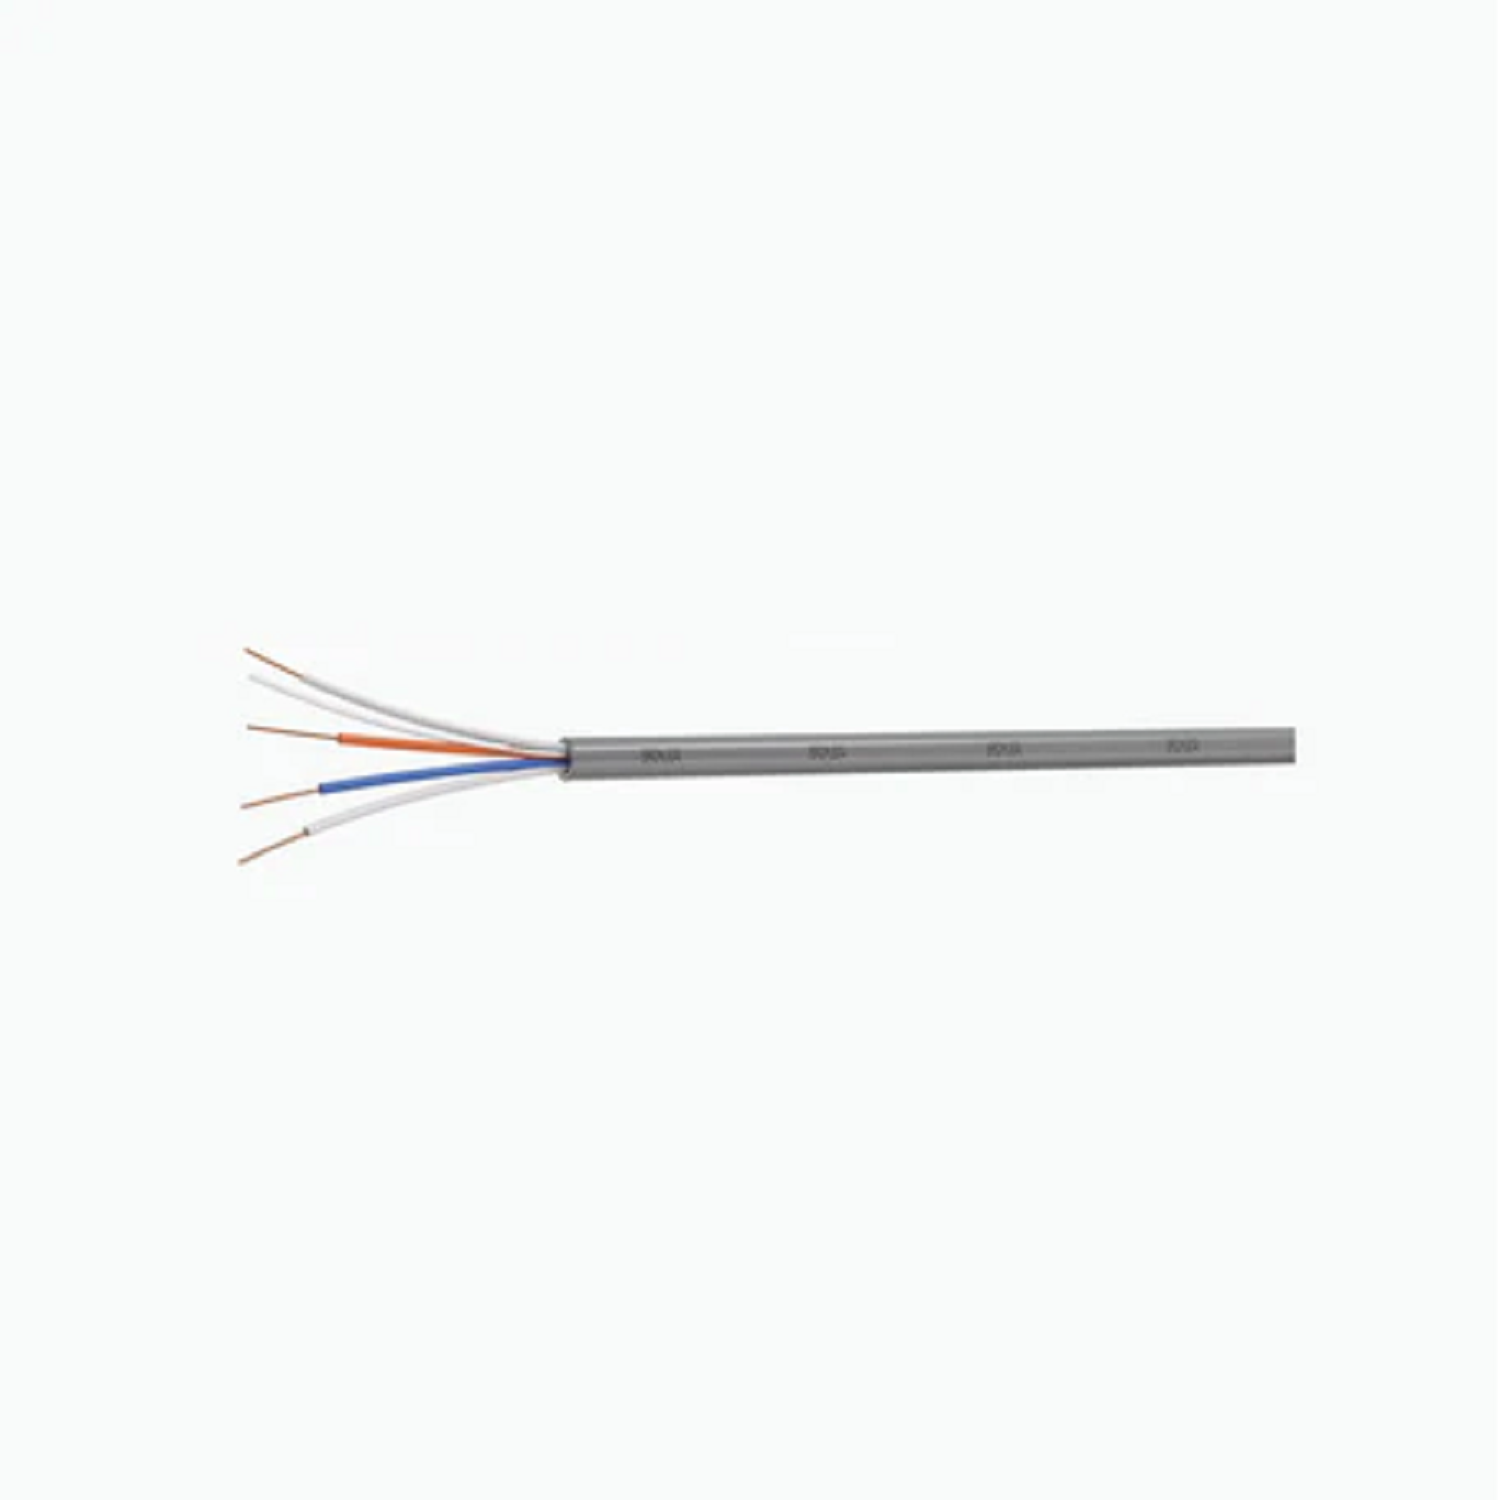 Teliphone Cable Polycab 0.5 (90 Meter)